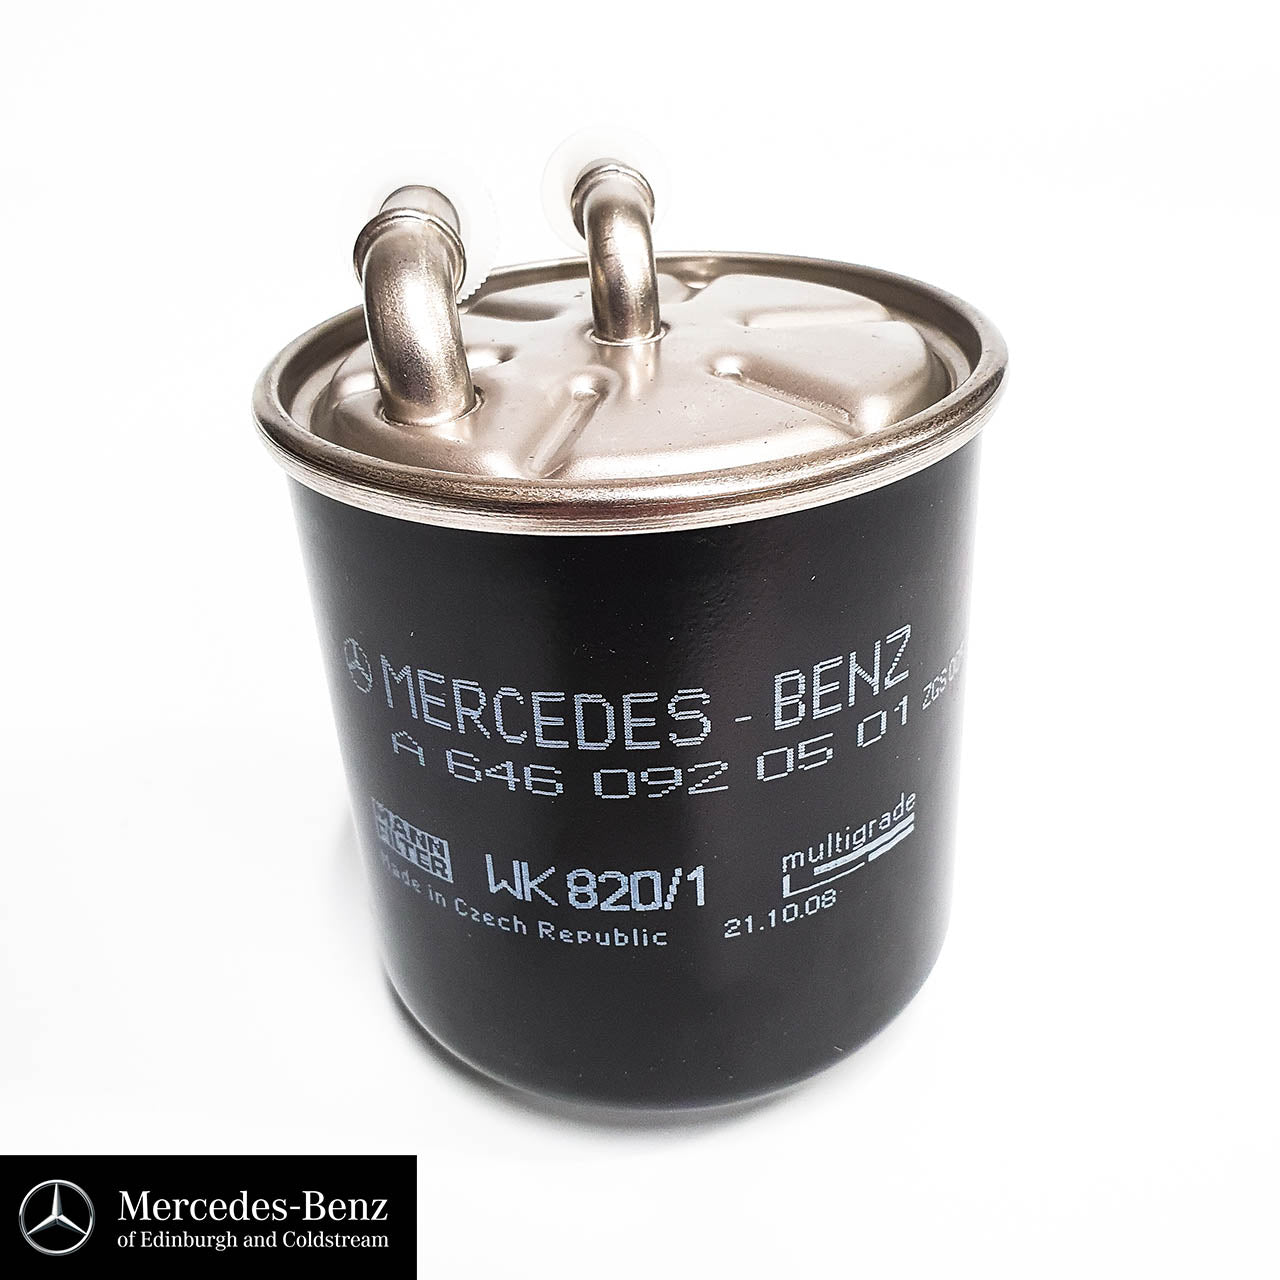 Genuine Mercedes-Benz Fuel Filter with out heating element for diesel engines